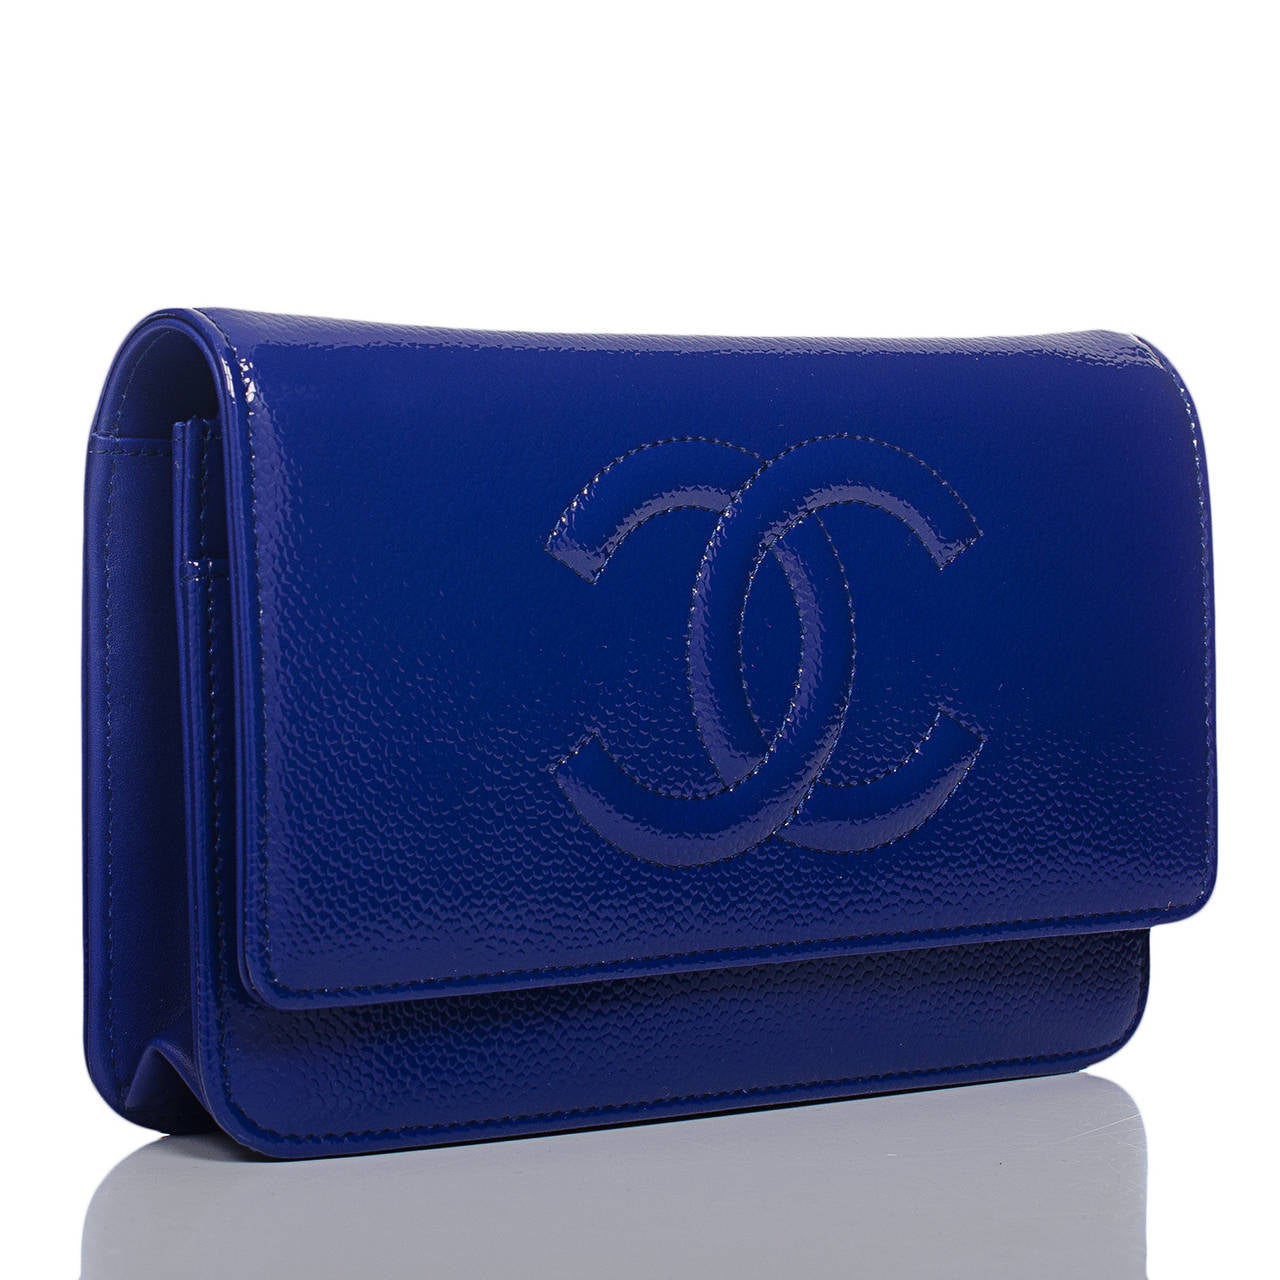 This Timeless Wallet On Chain (WOC) in a rare glazed blue caviar with ruthenium hardware features a front flap with tonal stitched large CC, hidden snap closure, expandable sides and bottom, and interwoven ruthenium and blue leather